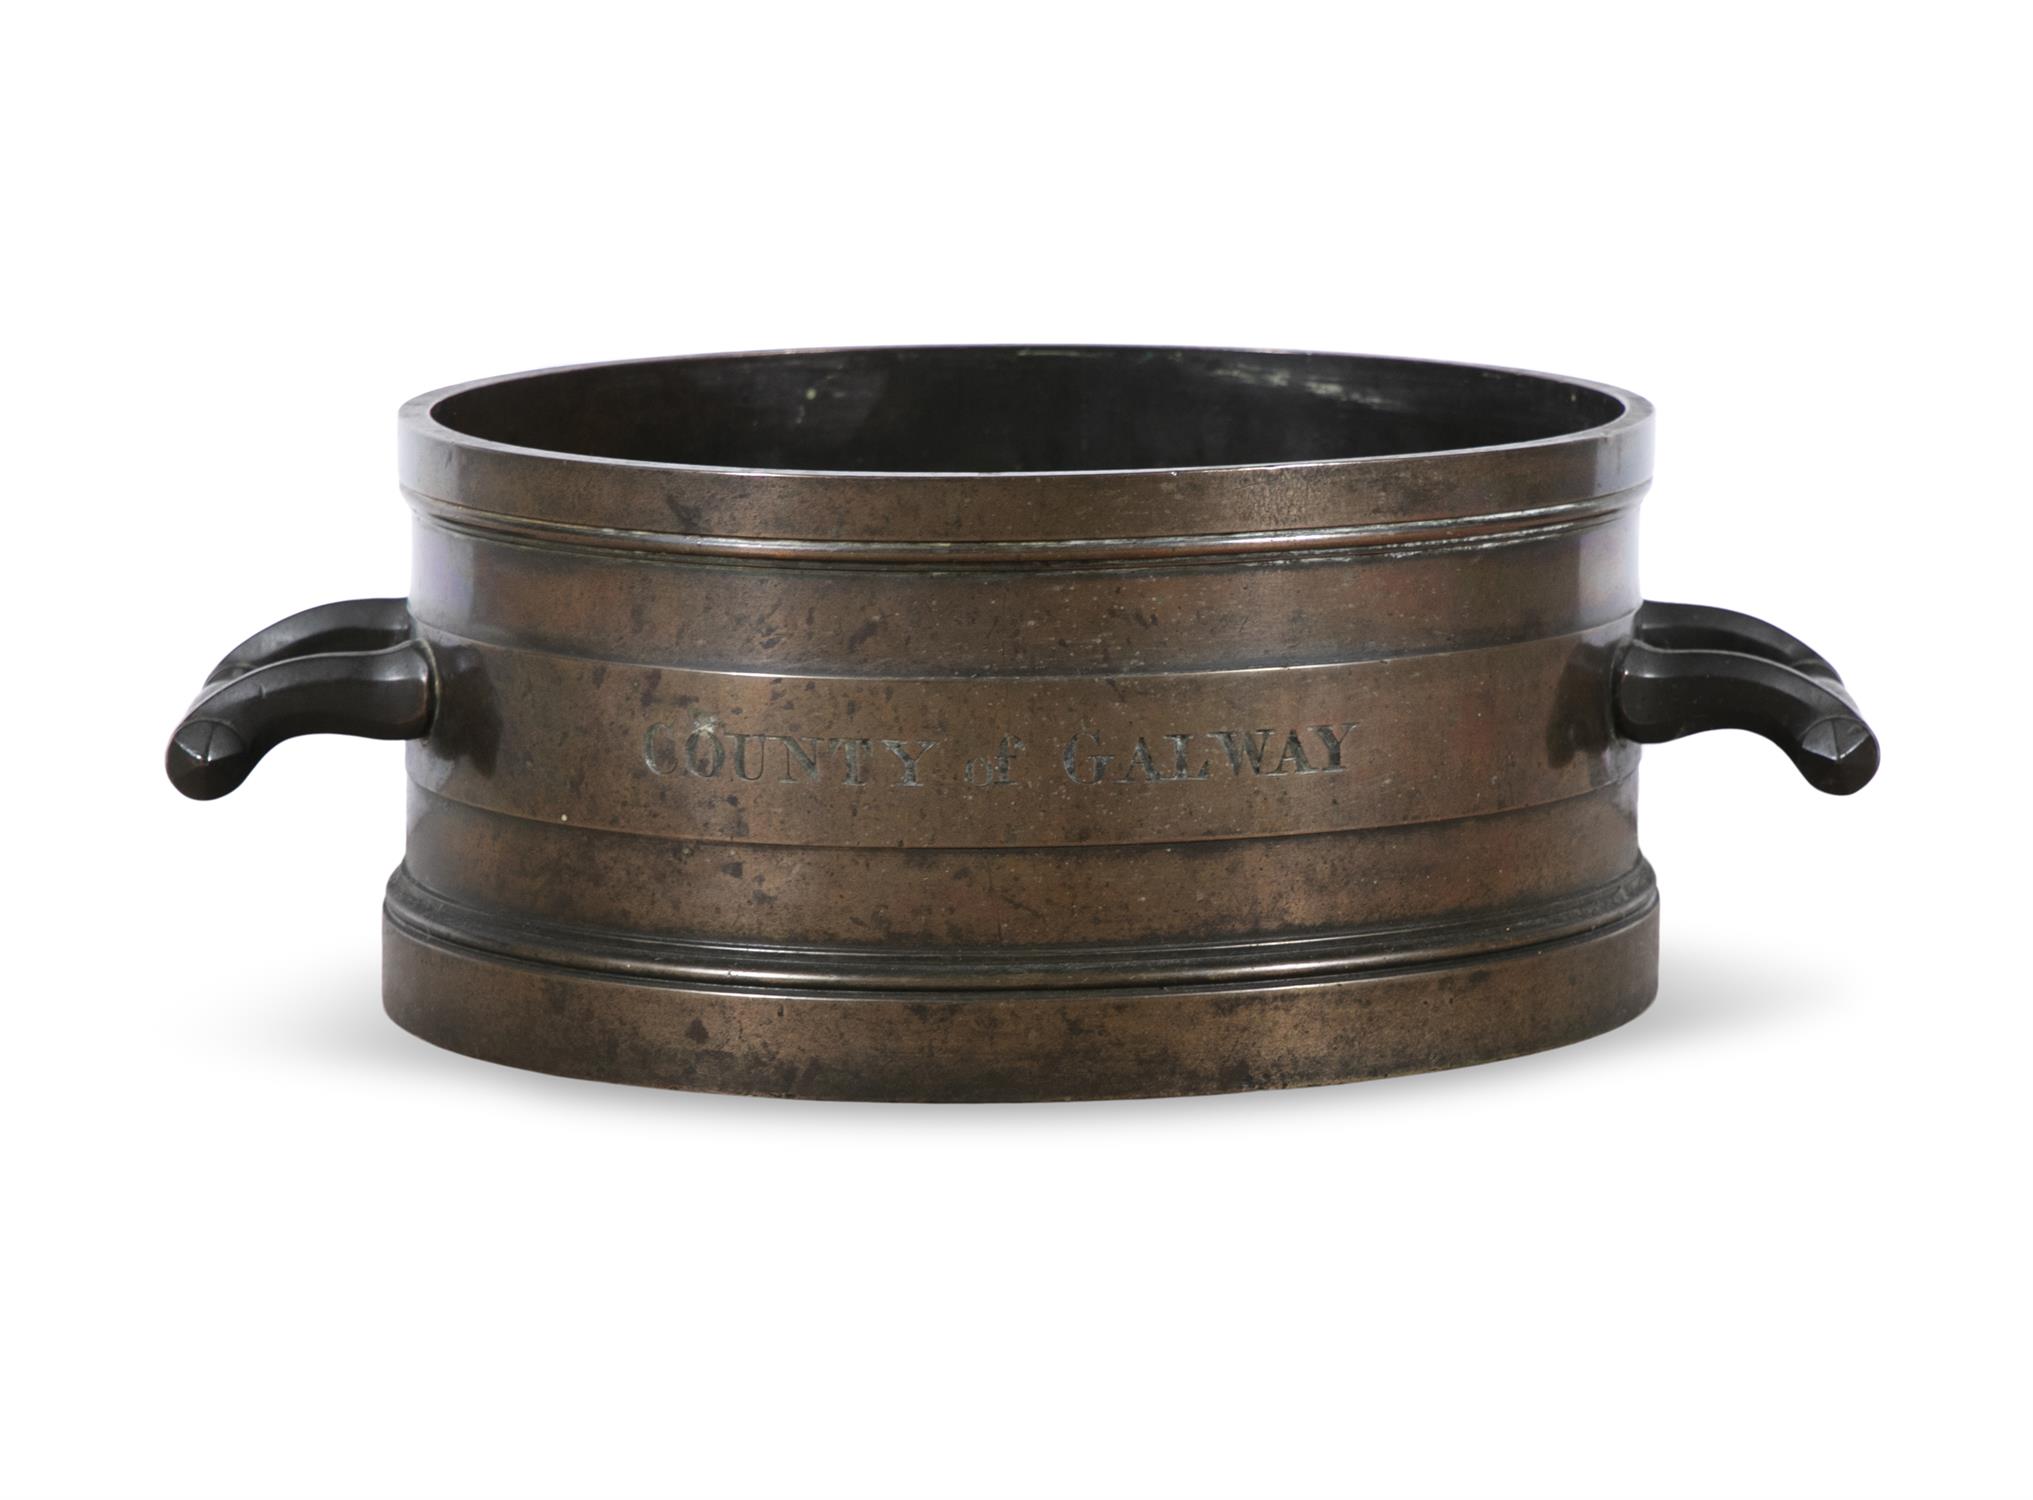 A BRONZE IMPERIAL PECK MEASURE - 'COUNTY OF GALWAY' C.1830 of cylindrical form with twin side